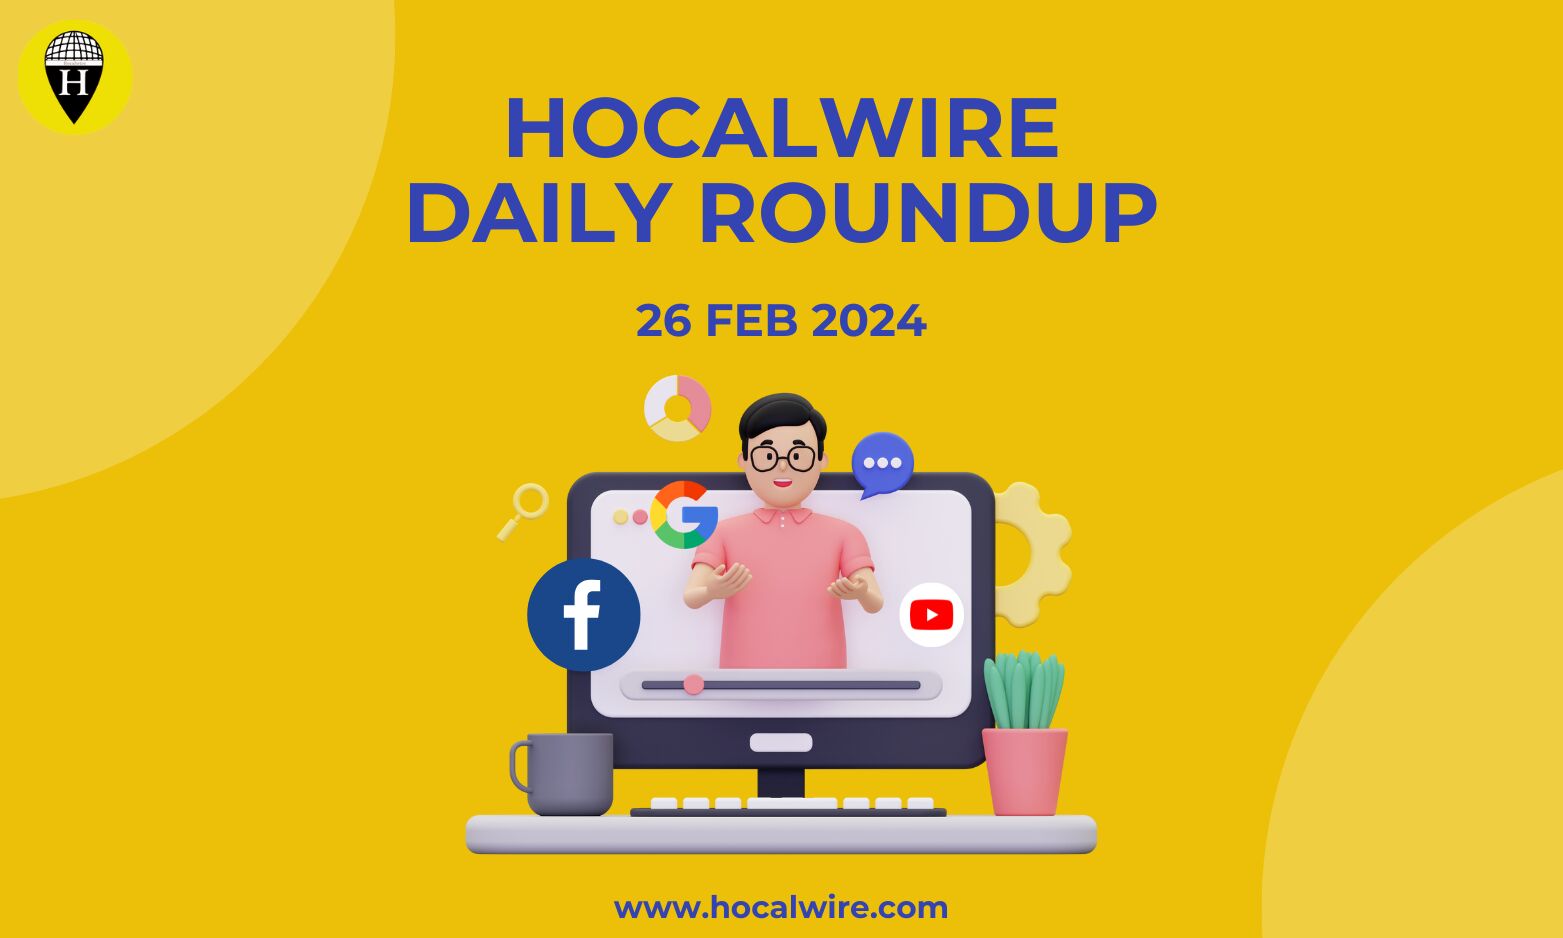 Hocalwire Daily Roundup | Massive Volatility Reported - Google Search Ranking Algorithm Update?